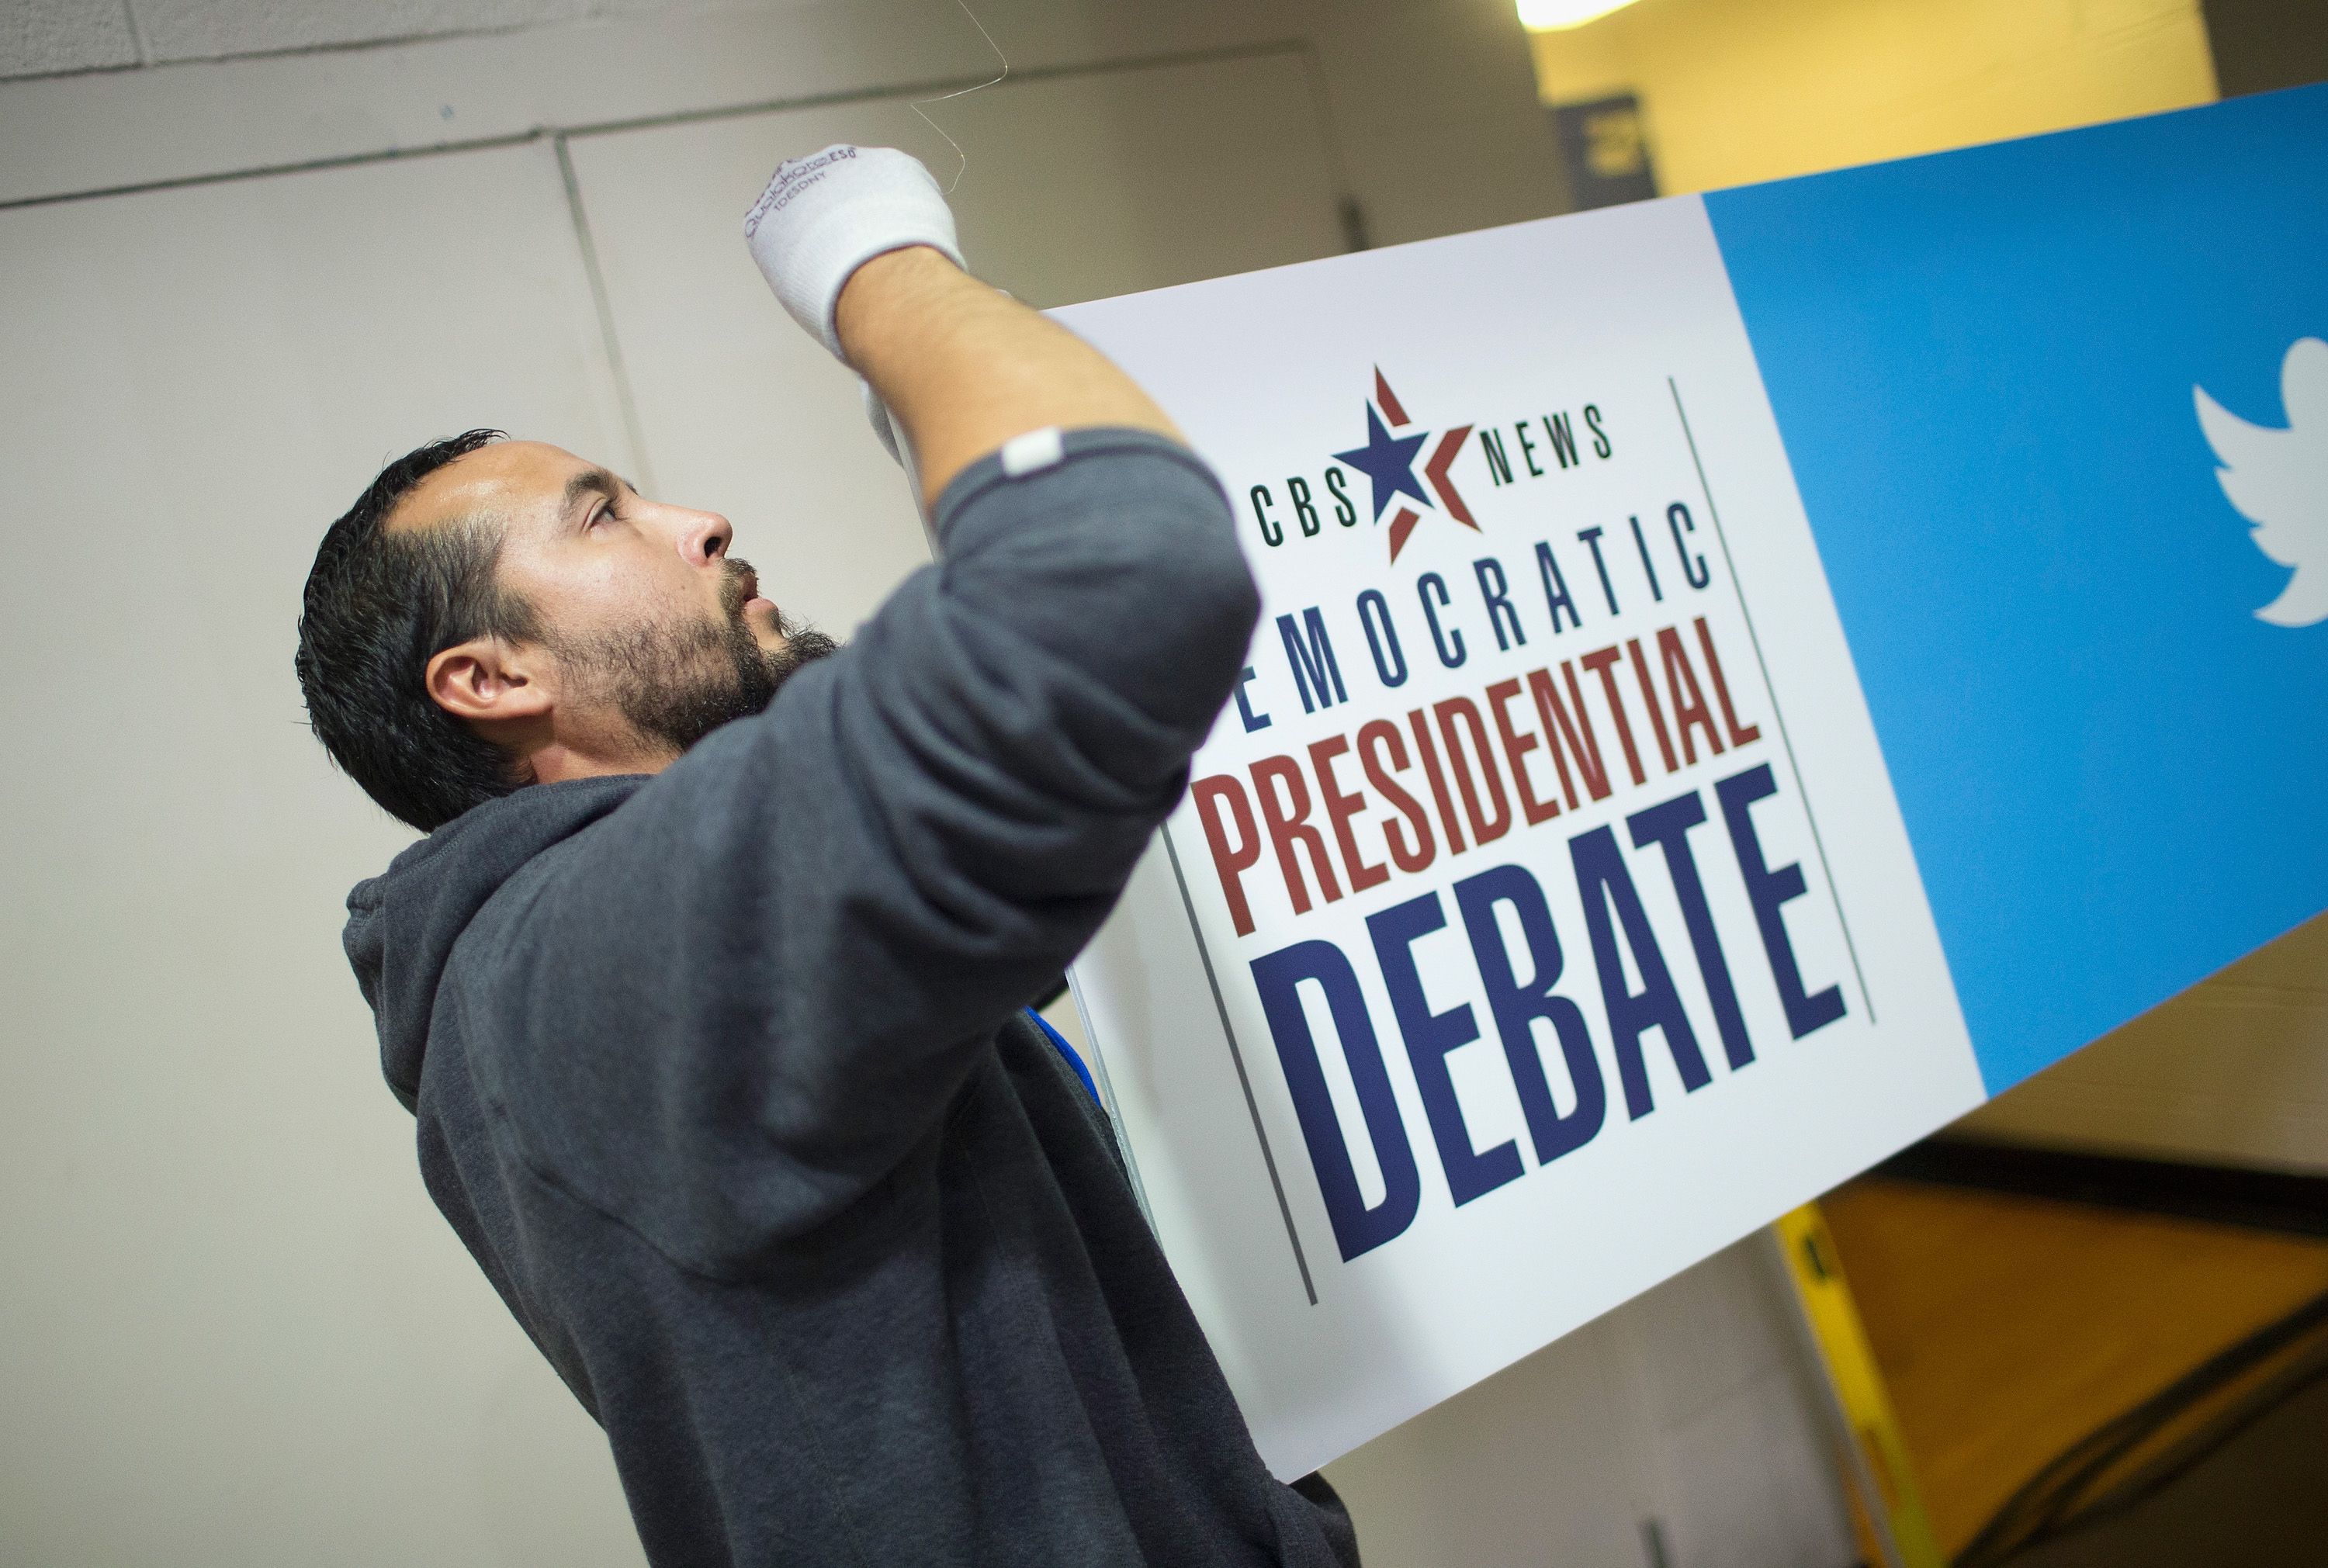 Daniel Rodriguez hangs a sign in the media file center being constructed on the campus of Drake University for tomorrows Democratic presidential debate on November 13, 2015 in Des Moines, Iowa. The debate will be the second for the democratic candidates seeking the nomination for president. (Scott Olson—Getty Images)